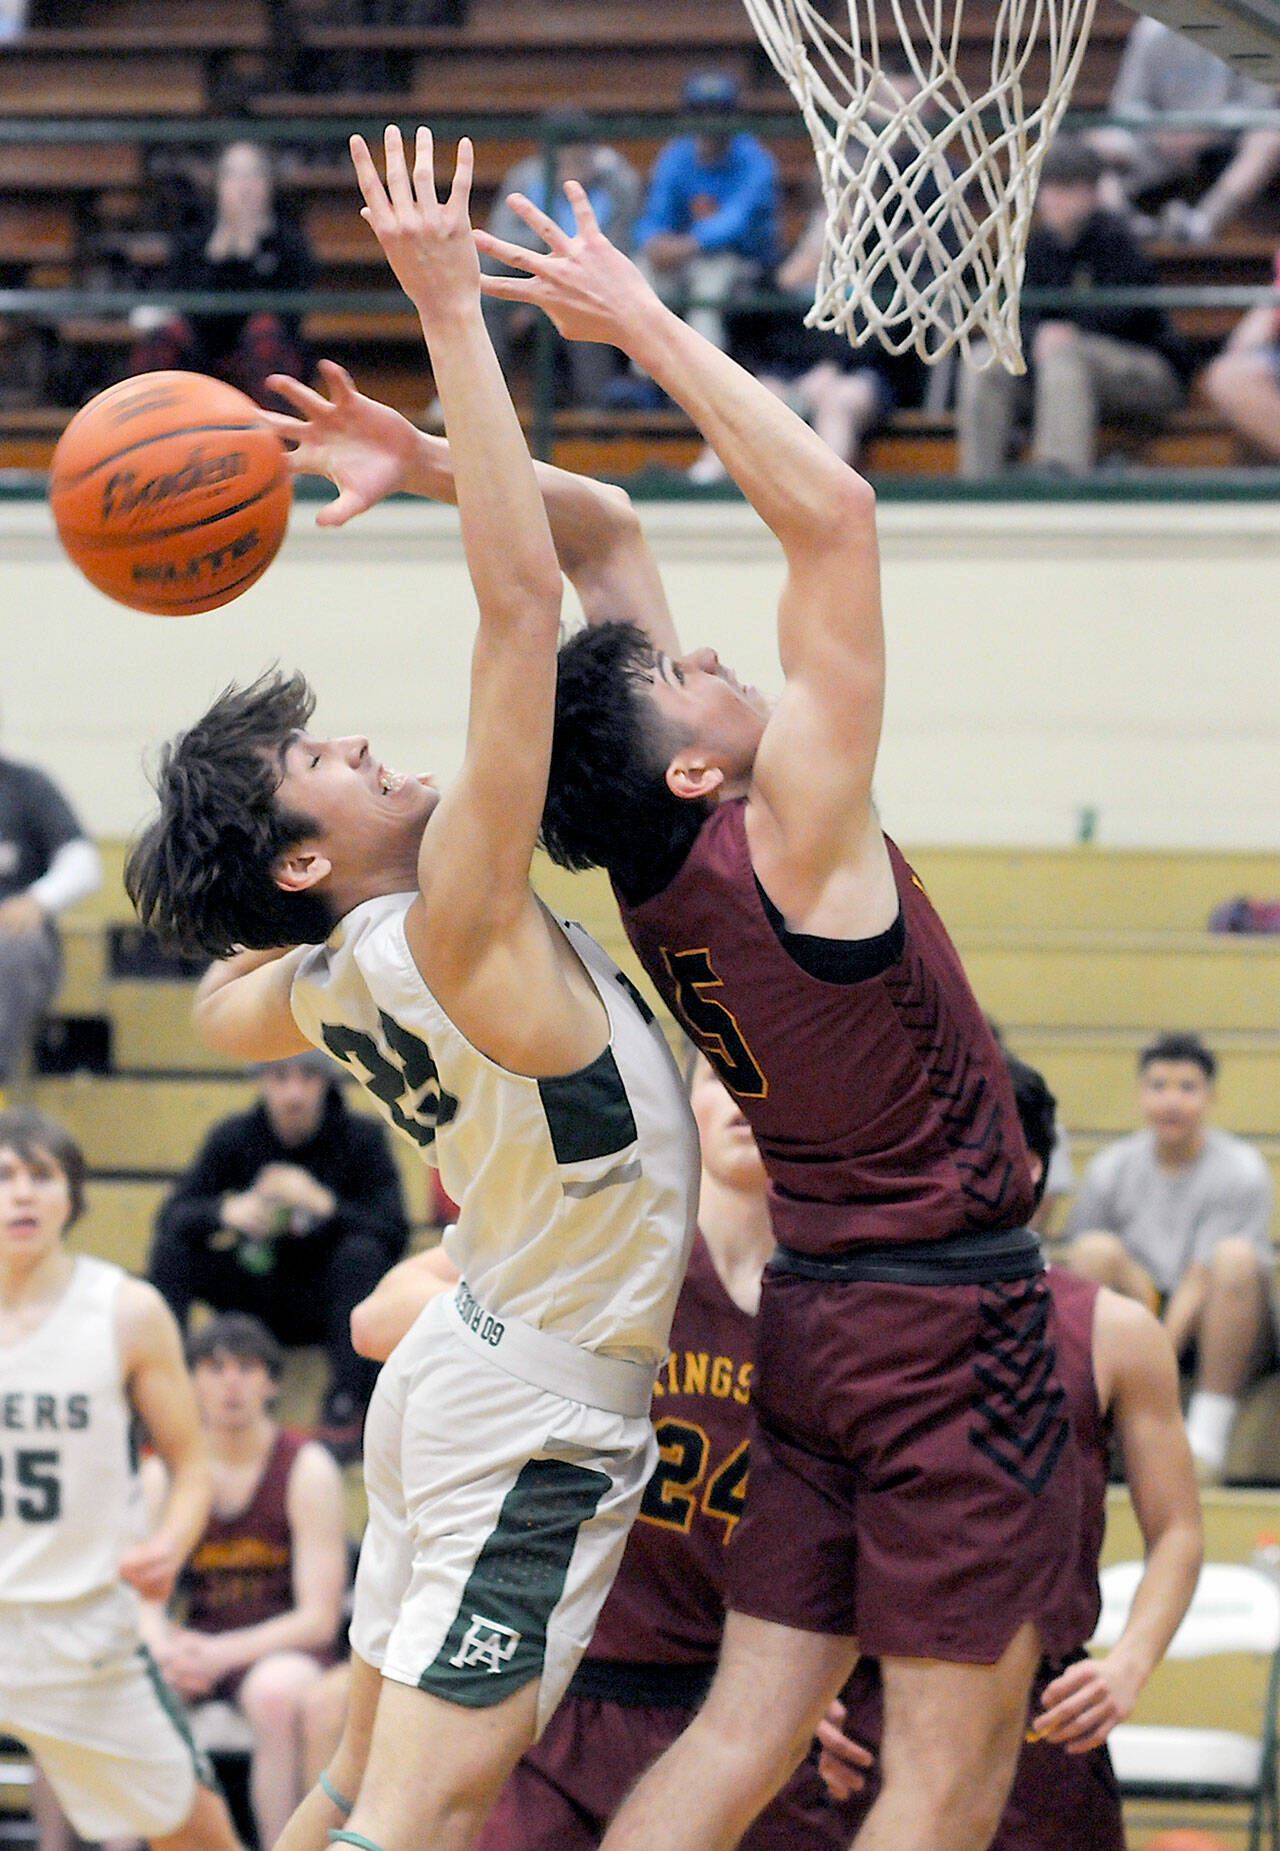 KEITH THORPE/PENINSULA DAILY NEWS Port Angeles’ Tyler Hunter, left, and Kingston’s Dakota Standley fight for a rebound during Thursday night’s game at Port Angeles High School.